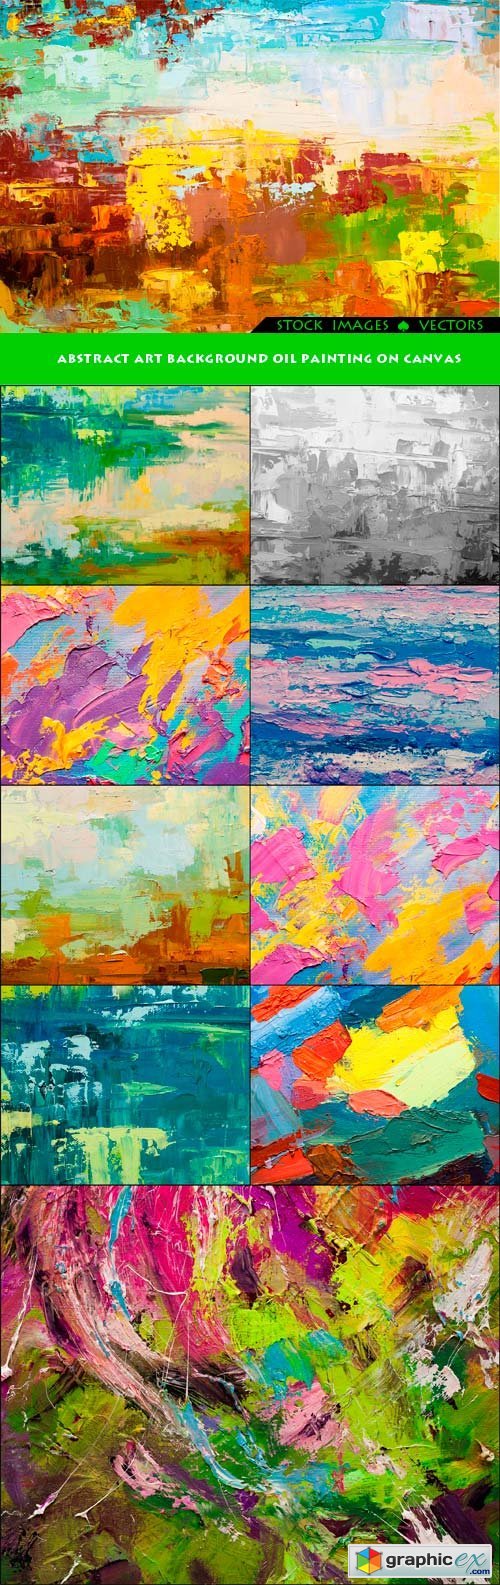 Abstract art background Oil painting on canvas 10x JPEG